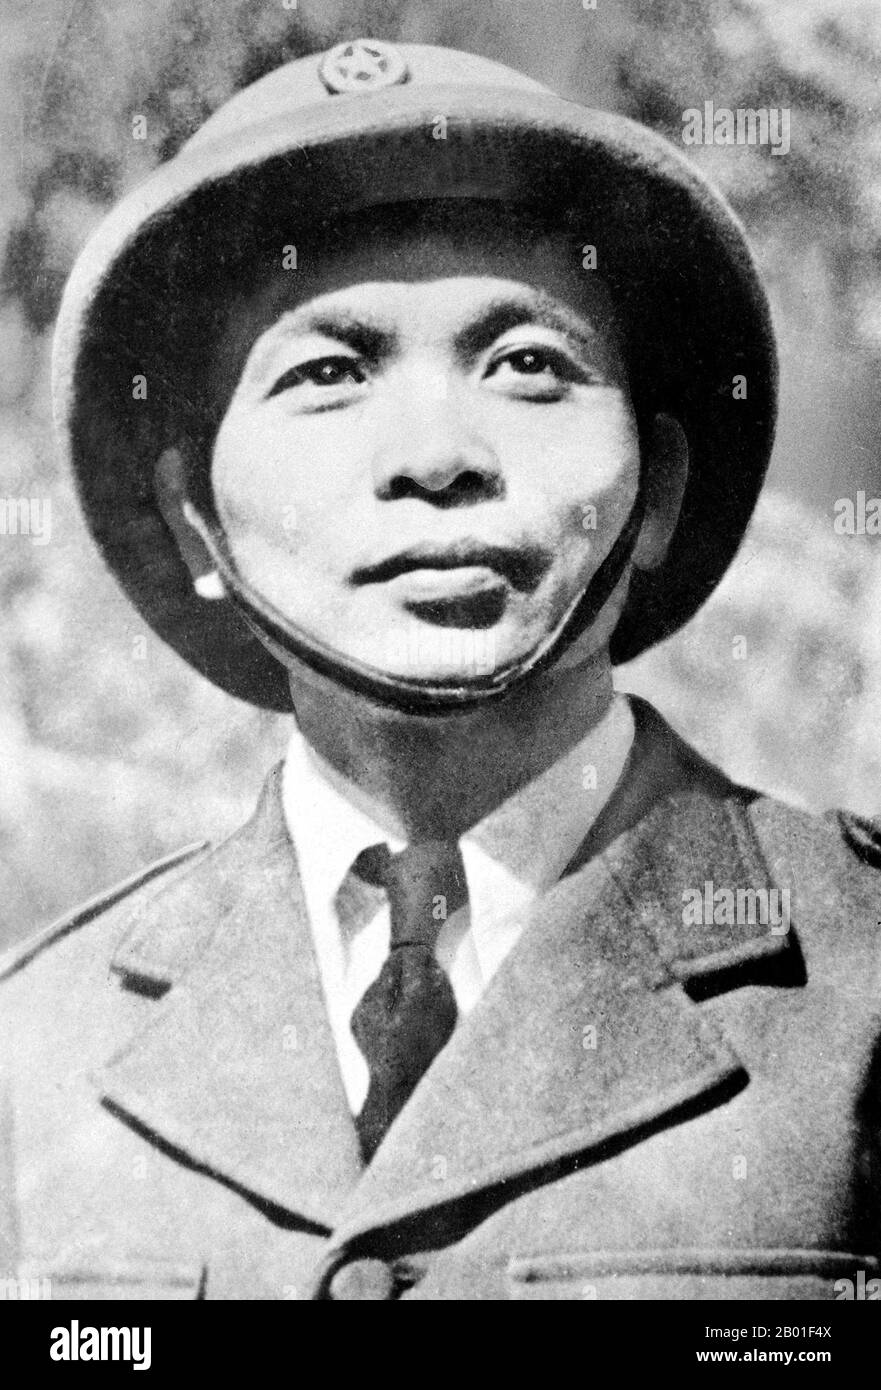 Vietnam: General Vo Nguyen Giap (25 August 1911 - 4 October 2013), Victor of Dien Bien Phu, 1954.  Vo Nguyen Giap, was a Vietnamese officer in the Vietnam People's Army and a politician. He was a principal commander in two wars: the First Indochina War (1946-1954) and the Second Indochina War (1960-1975). He participated in the following historically significant battles: Lạng Sơn (1950); Hòa Bình (1951-1952); Điện Biên Phủ (1954); the Tết Offensive (1968); the Nguyên Huế Offensive (known in the West as the Easter Offensive) (1972); and the final Hồ Chí Minh Campaign (1975). Stock Photo